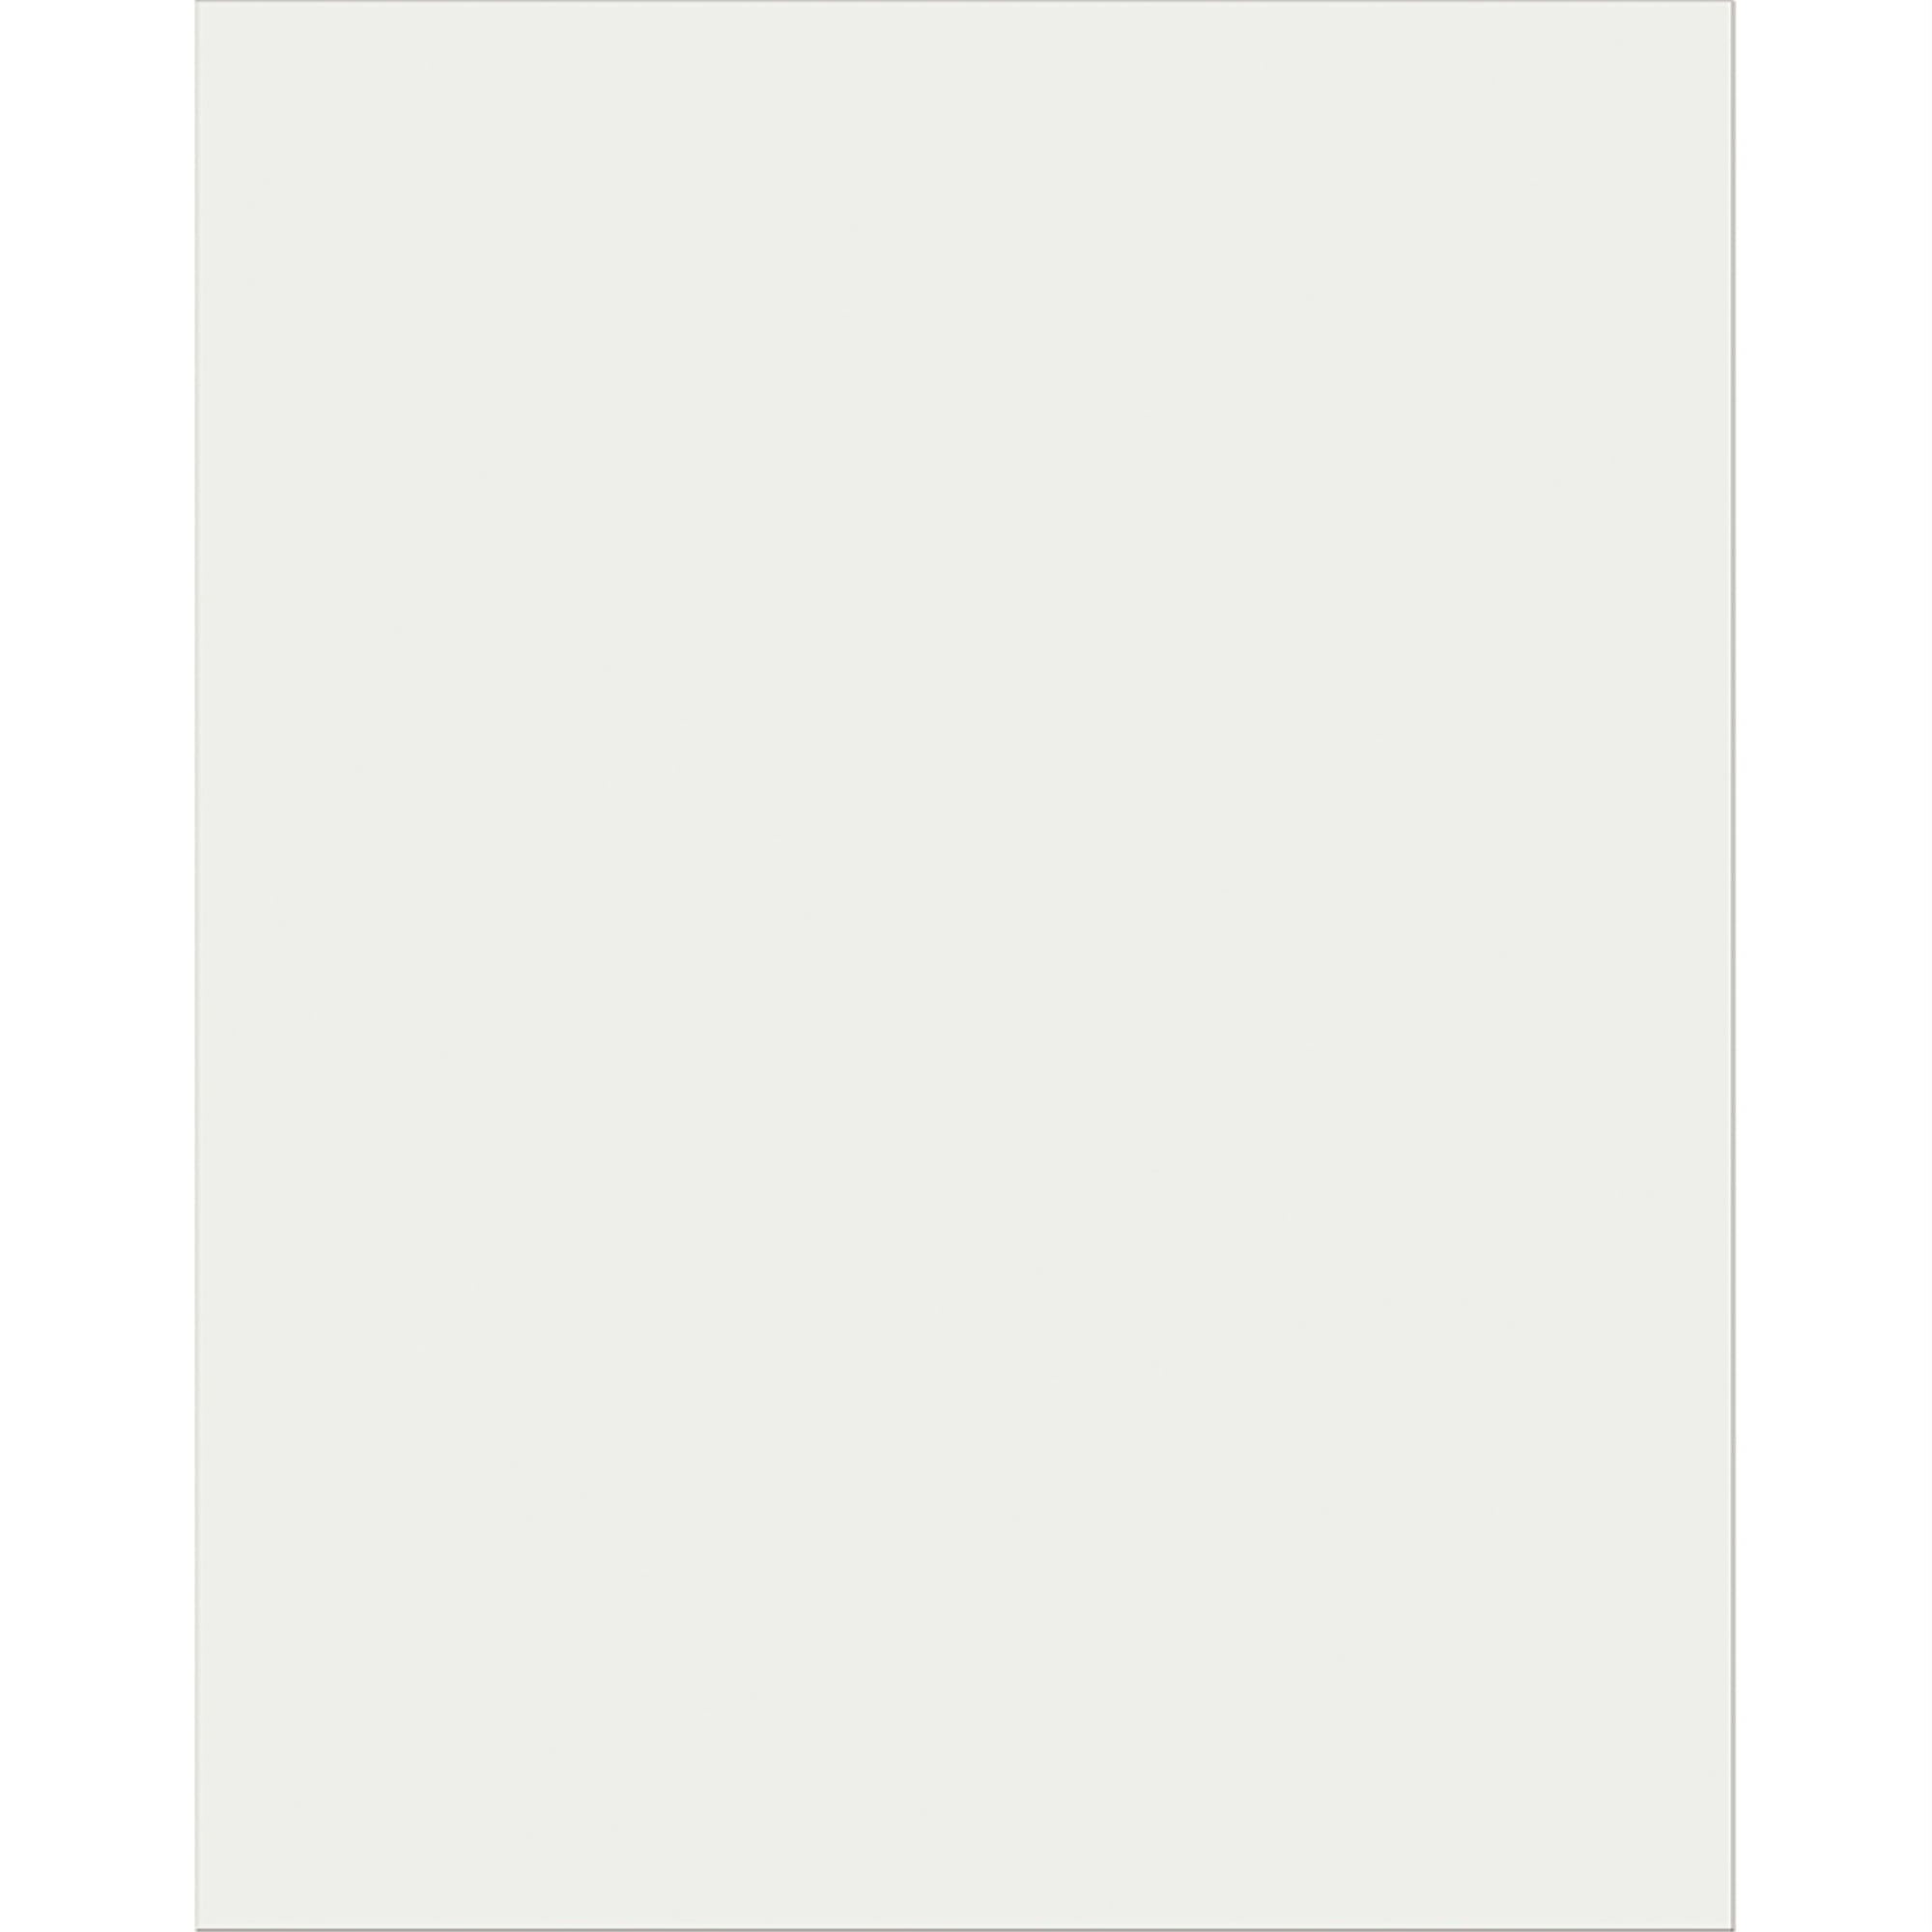 UCreate Plastic Poster Board, Clear, 22" x 28", 25 Sheets